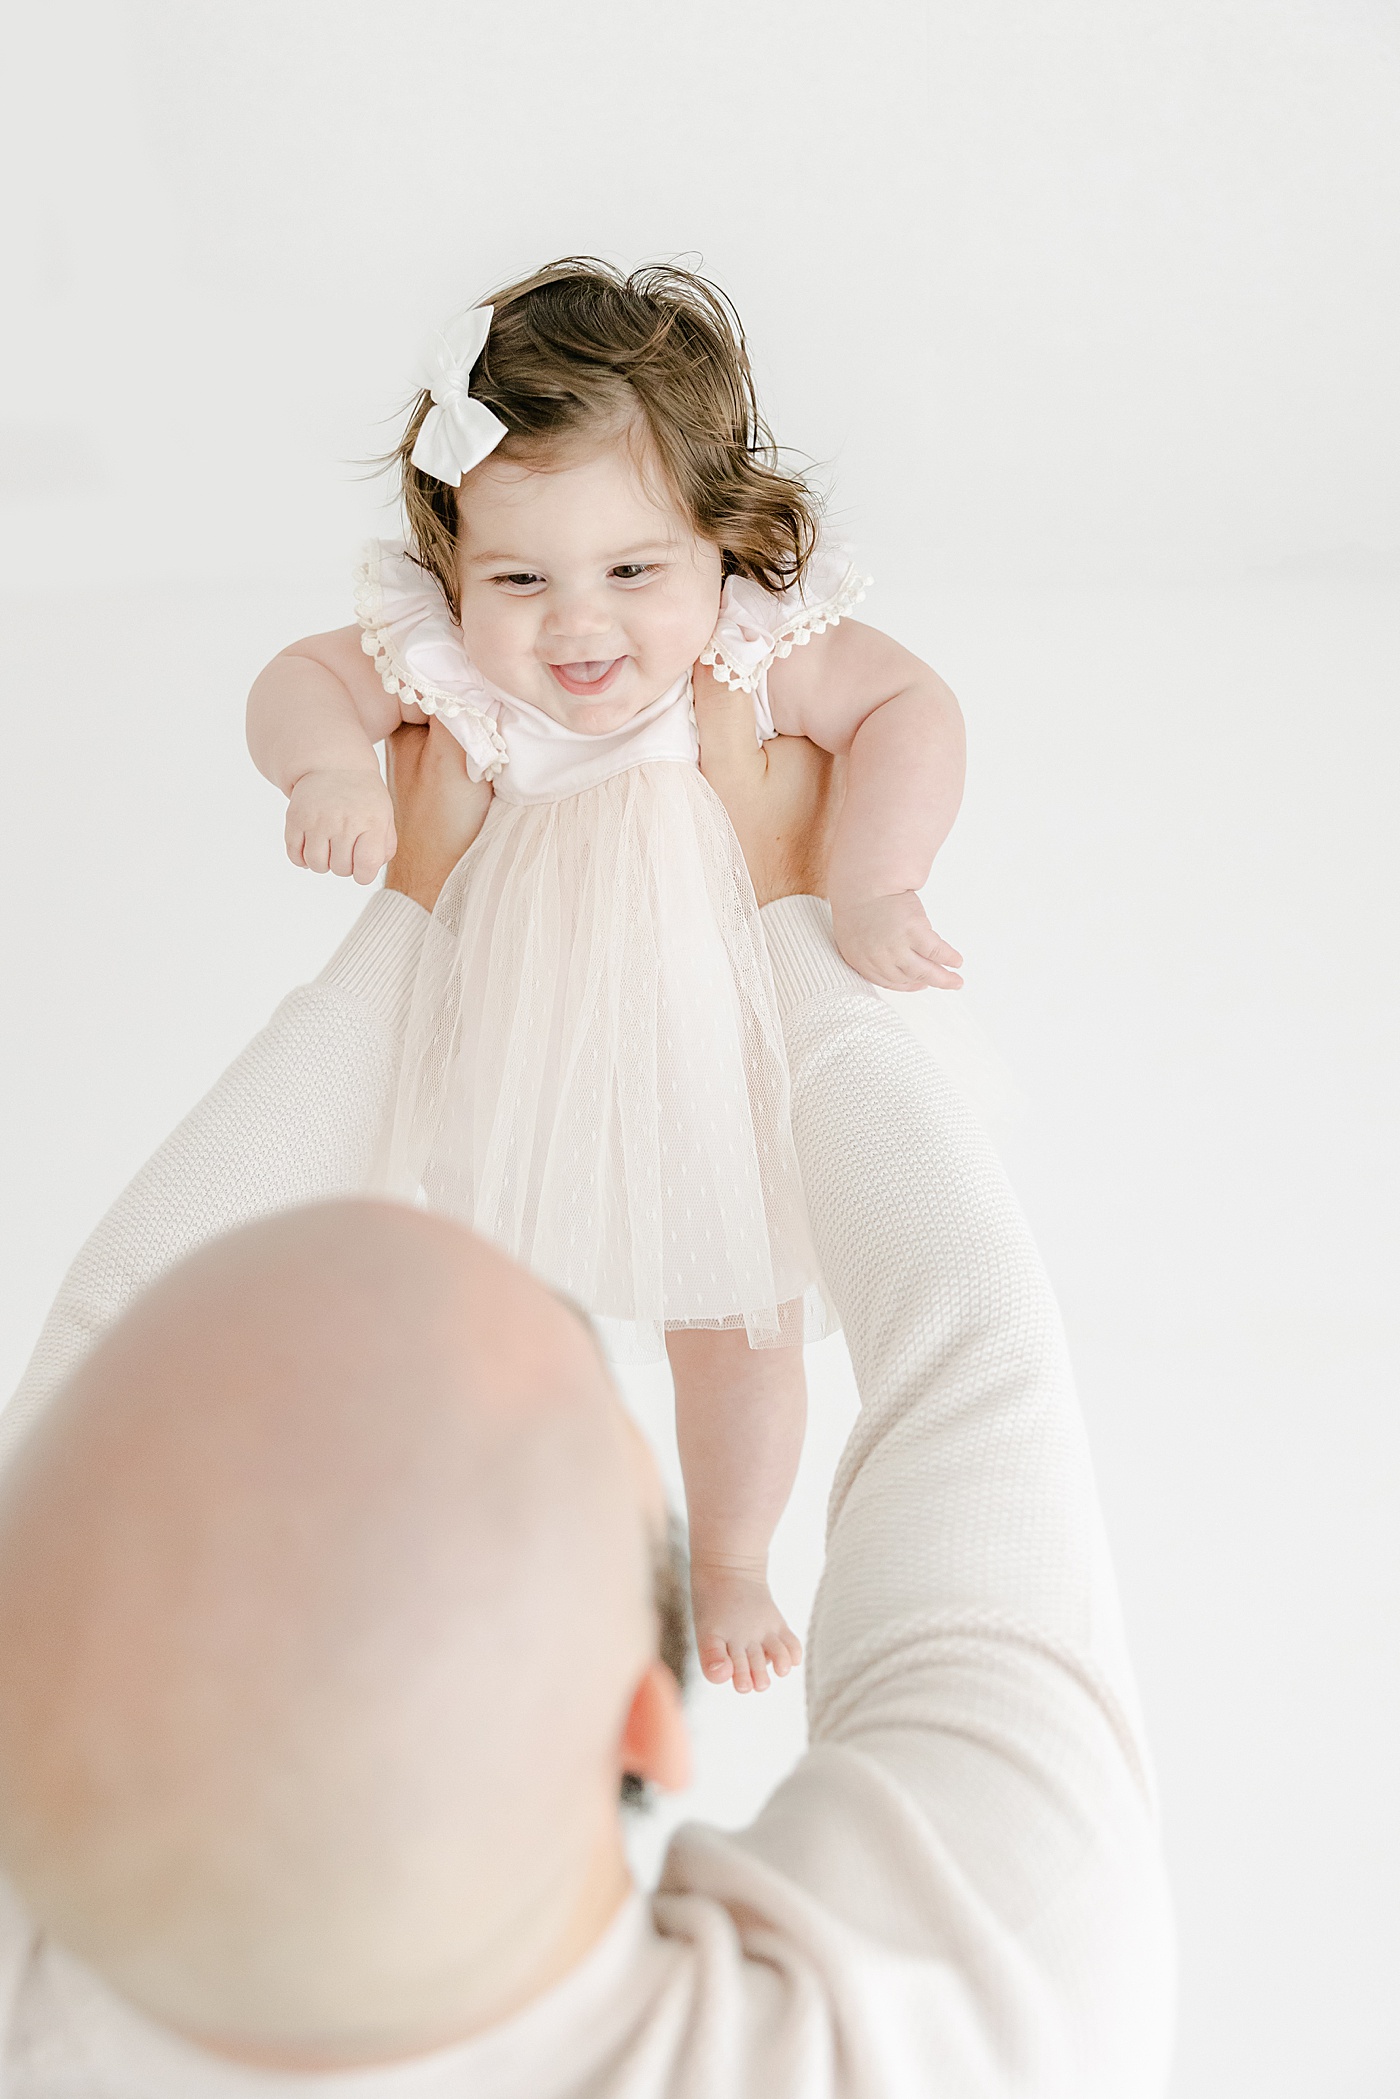 Dad holding daughter up during photoshoot at 6 months | Kristin Wood Photography